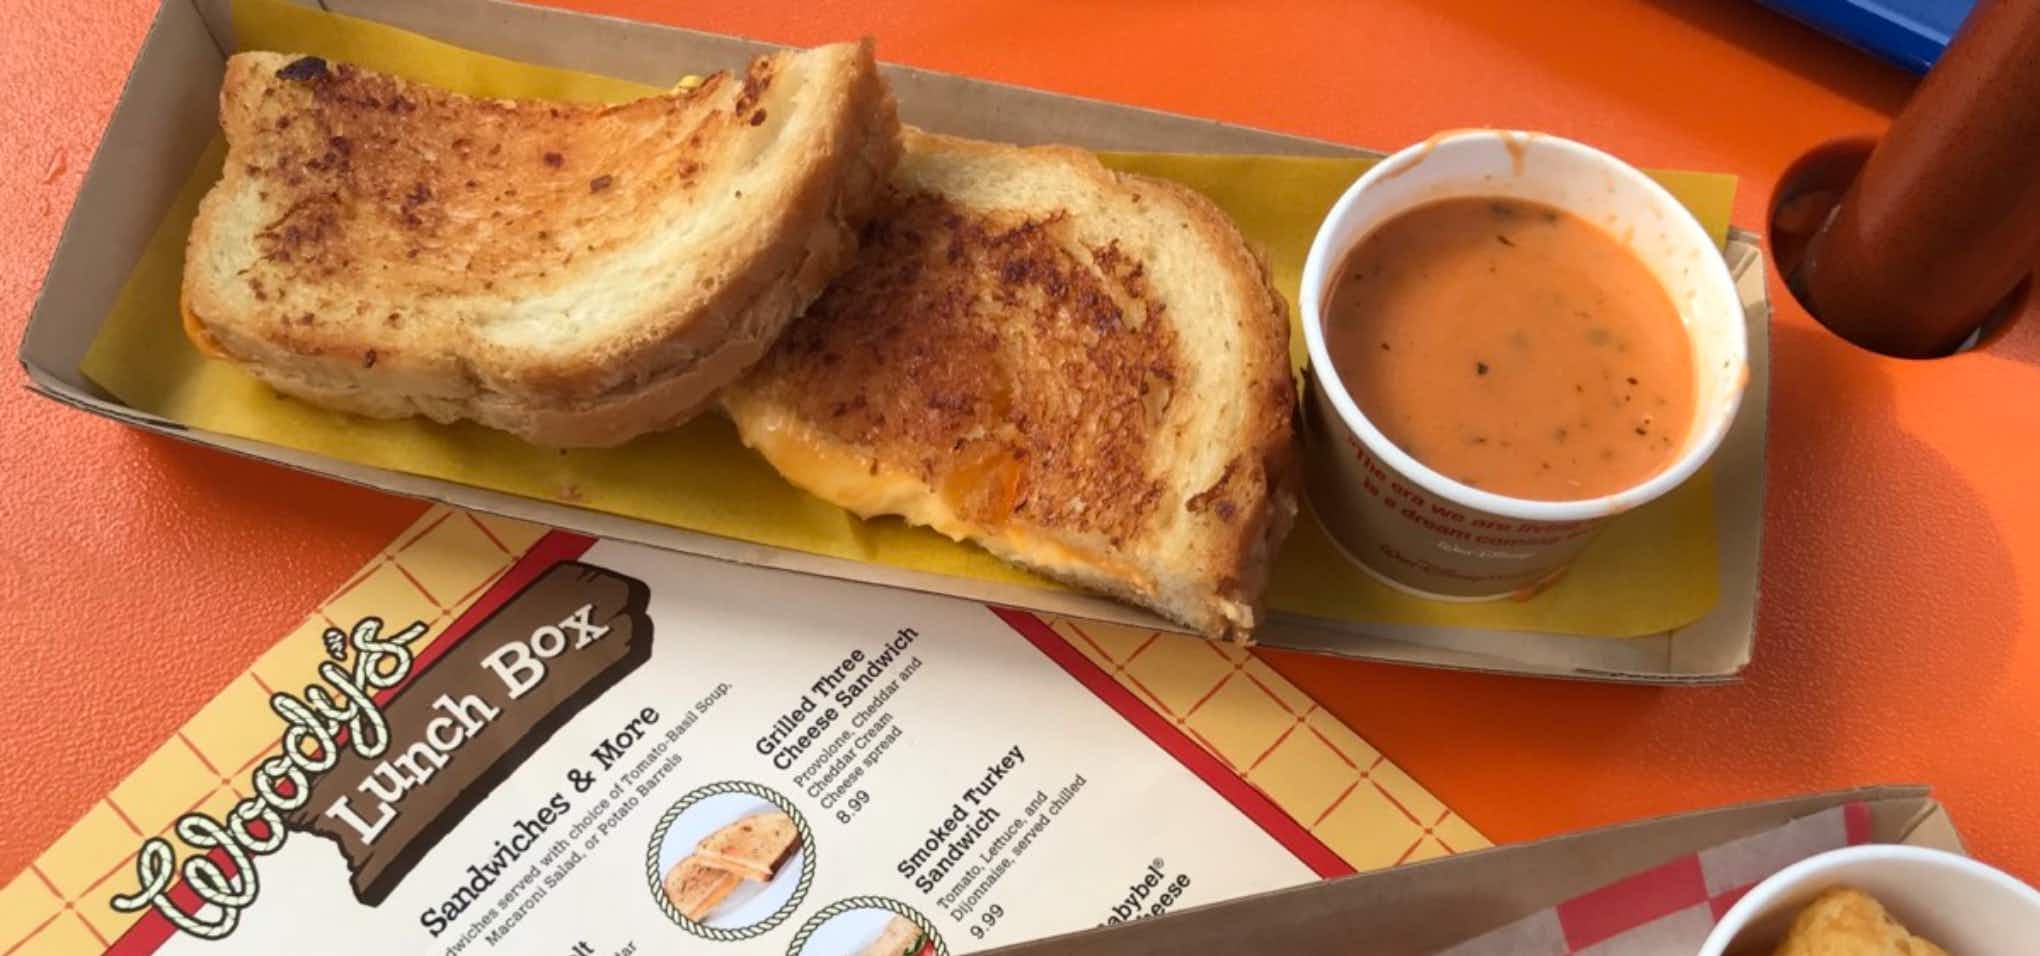 Grilled cheese on a plate with tomato soup with a Woody's Lunch Box menu nearby